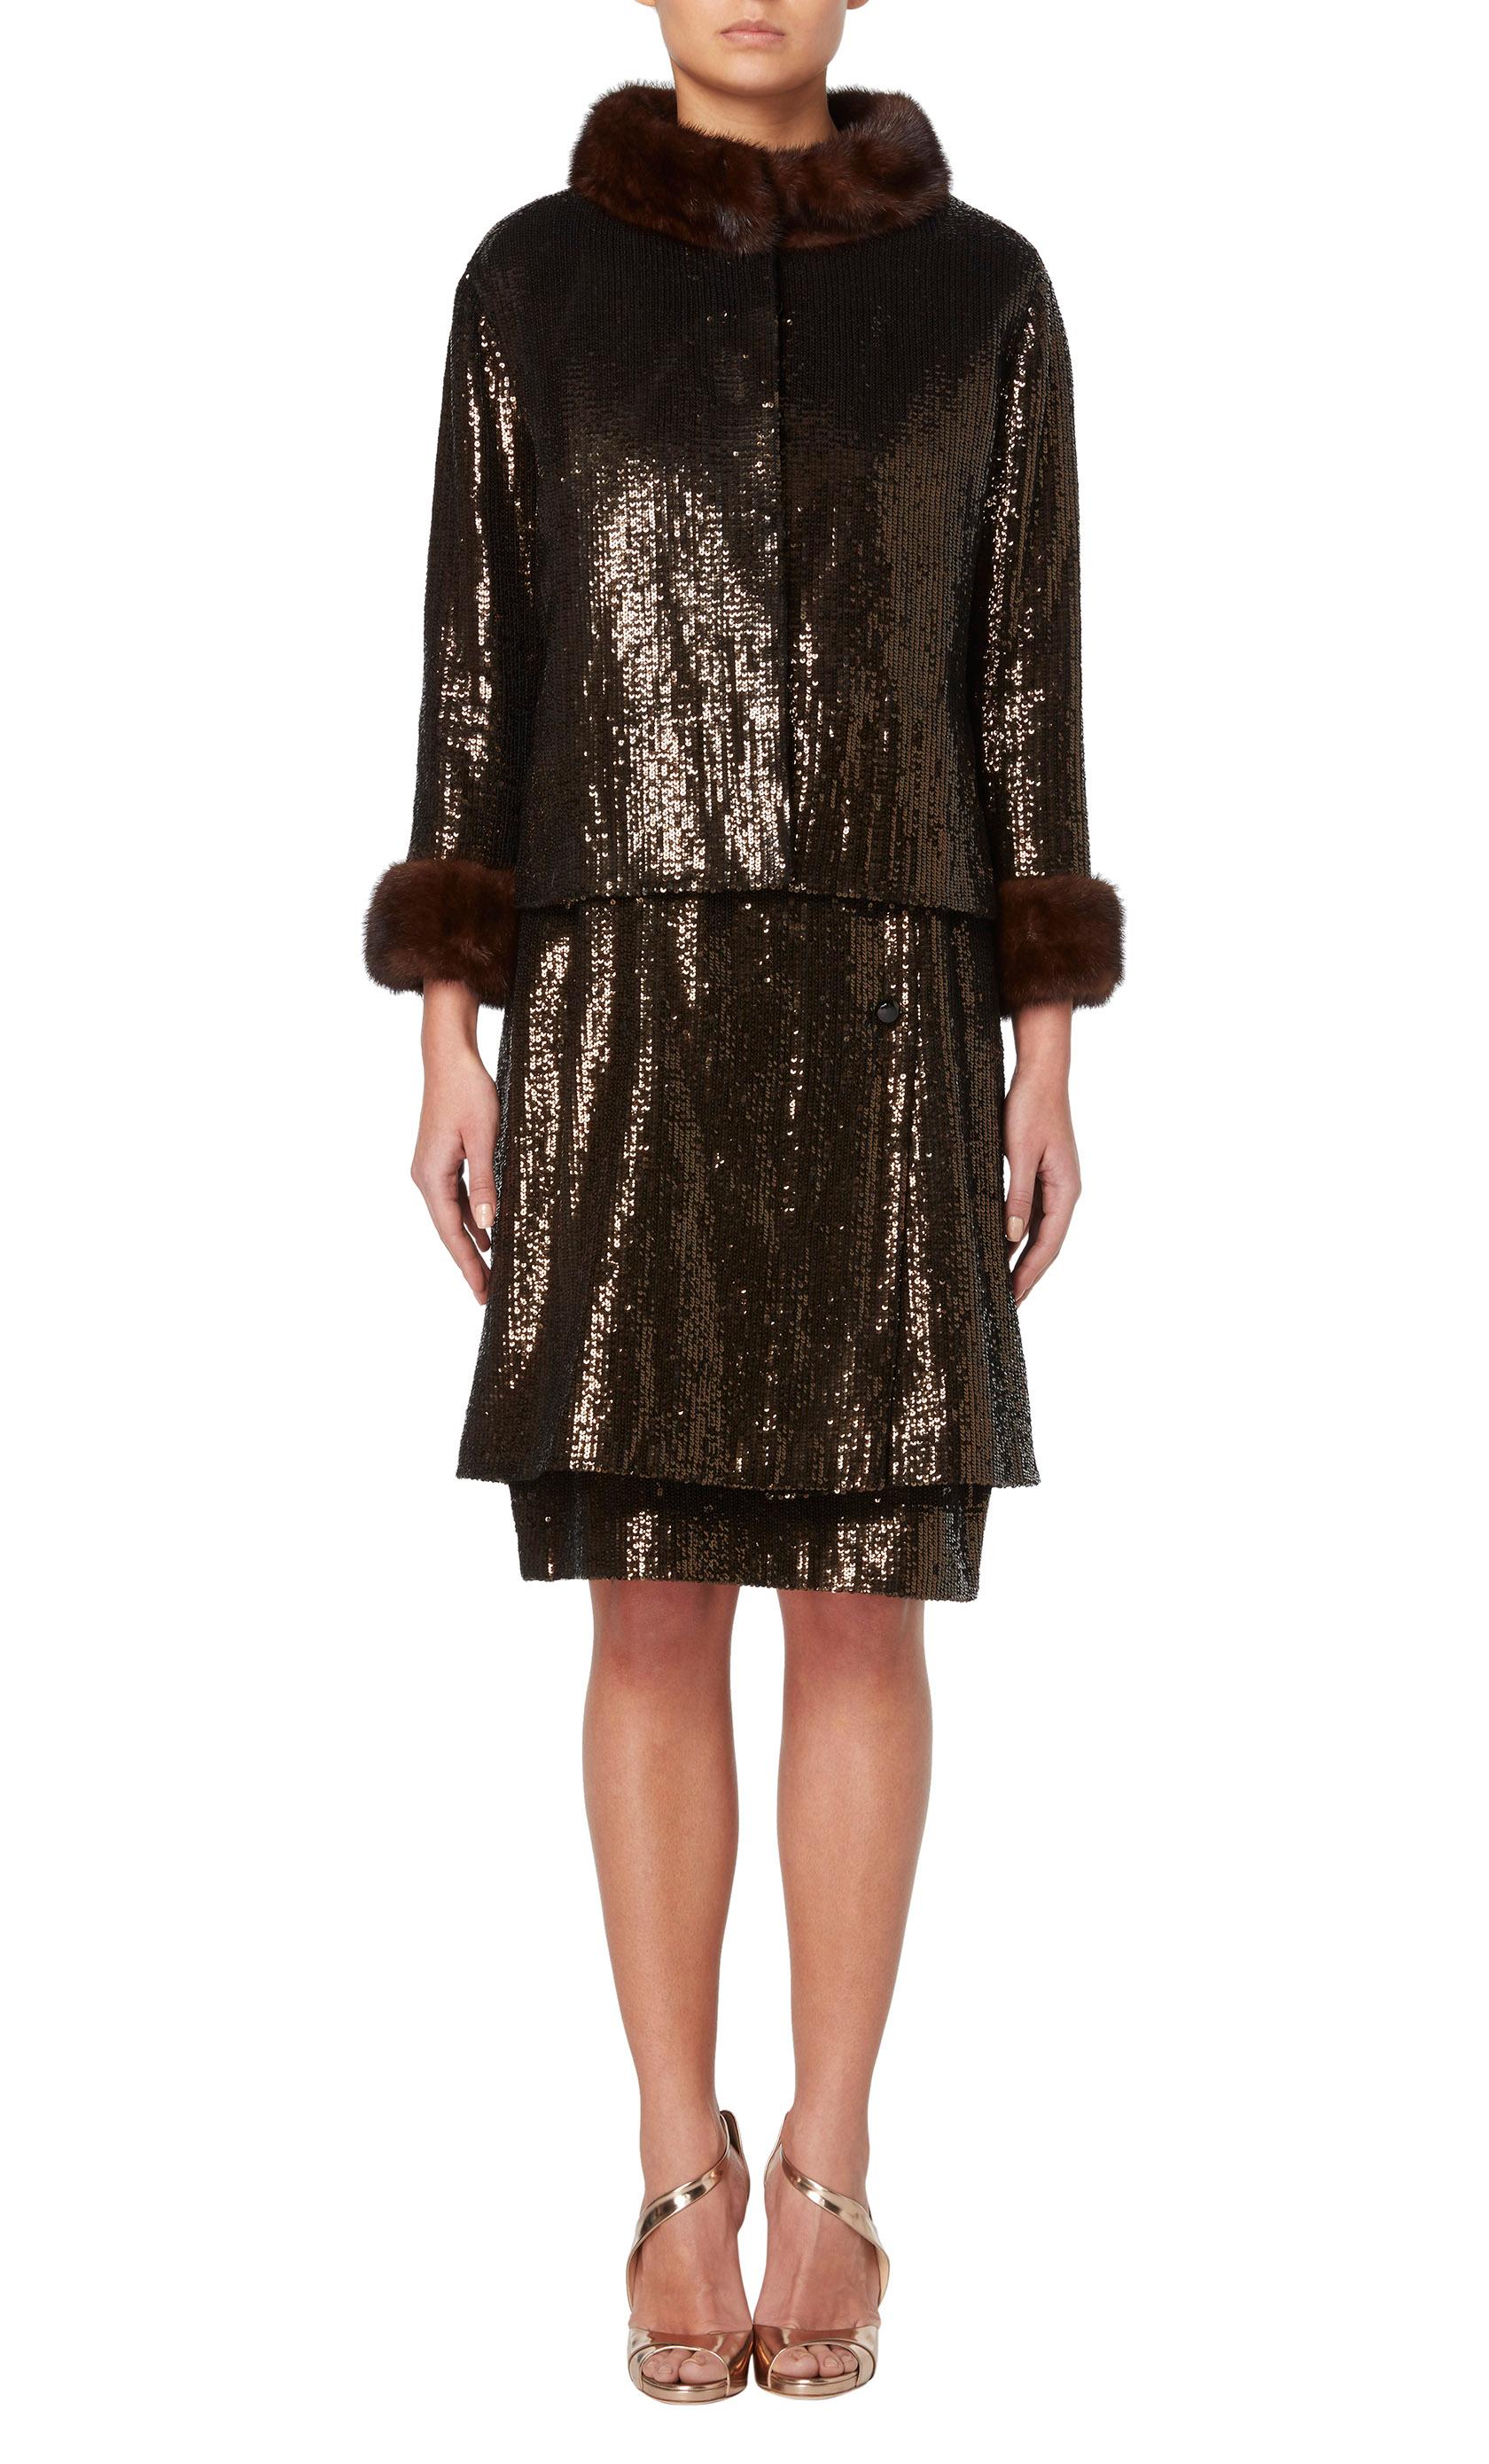 A stunning piece of haute couture, this Yves Saint Laurent suit is comprised of a jacket and sleeveless dress, both completely covered in brown sequins. The dress has a square neckline and double layer skirt, with decorative black faceted buttons to